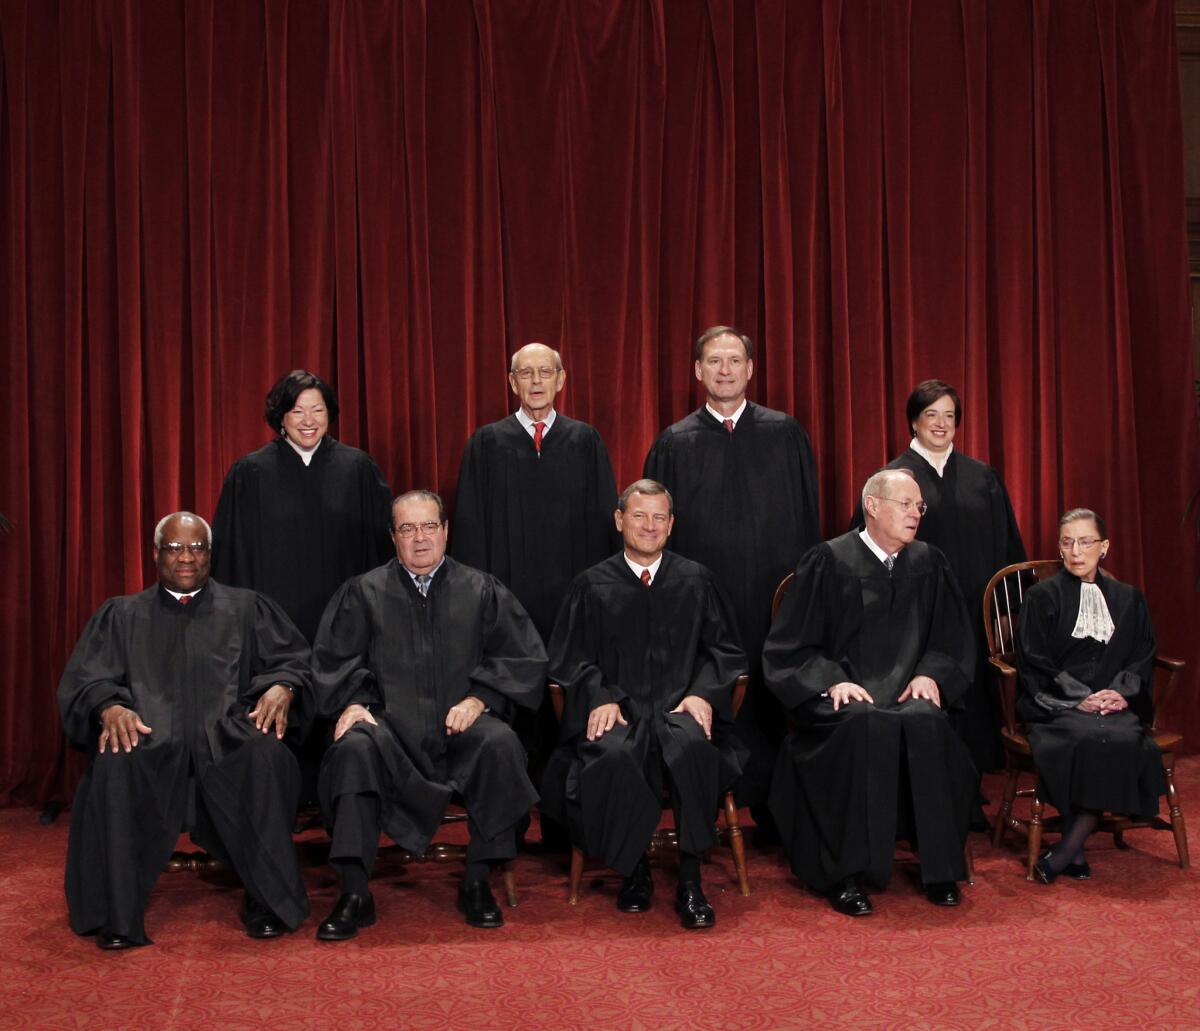 The justices of the U.S. Supreme Court in a group portrait at the Supreme Court Building in Washington on October 8, 2010.